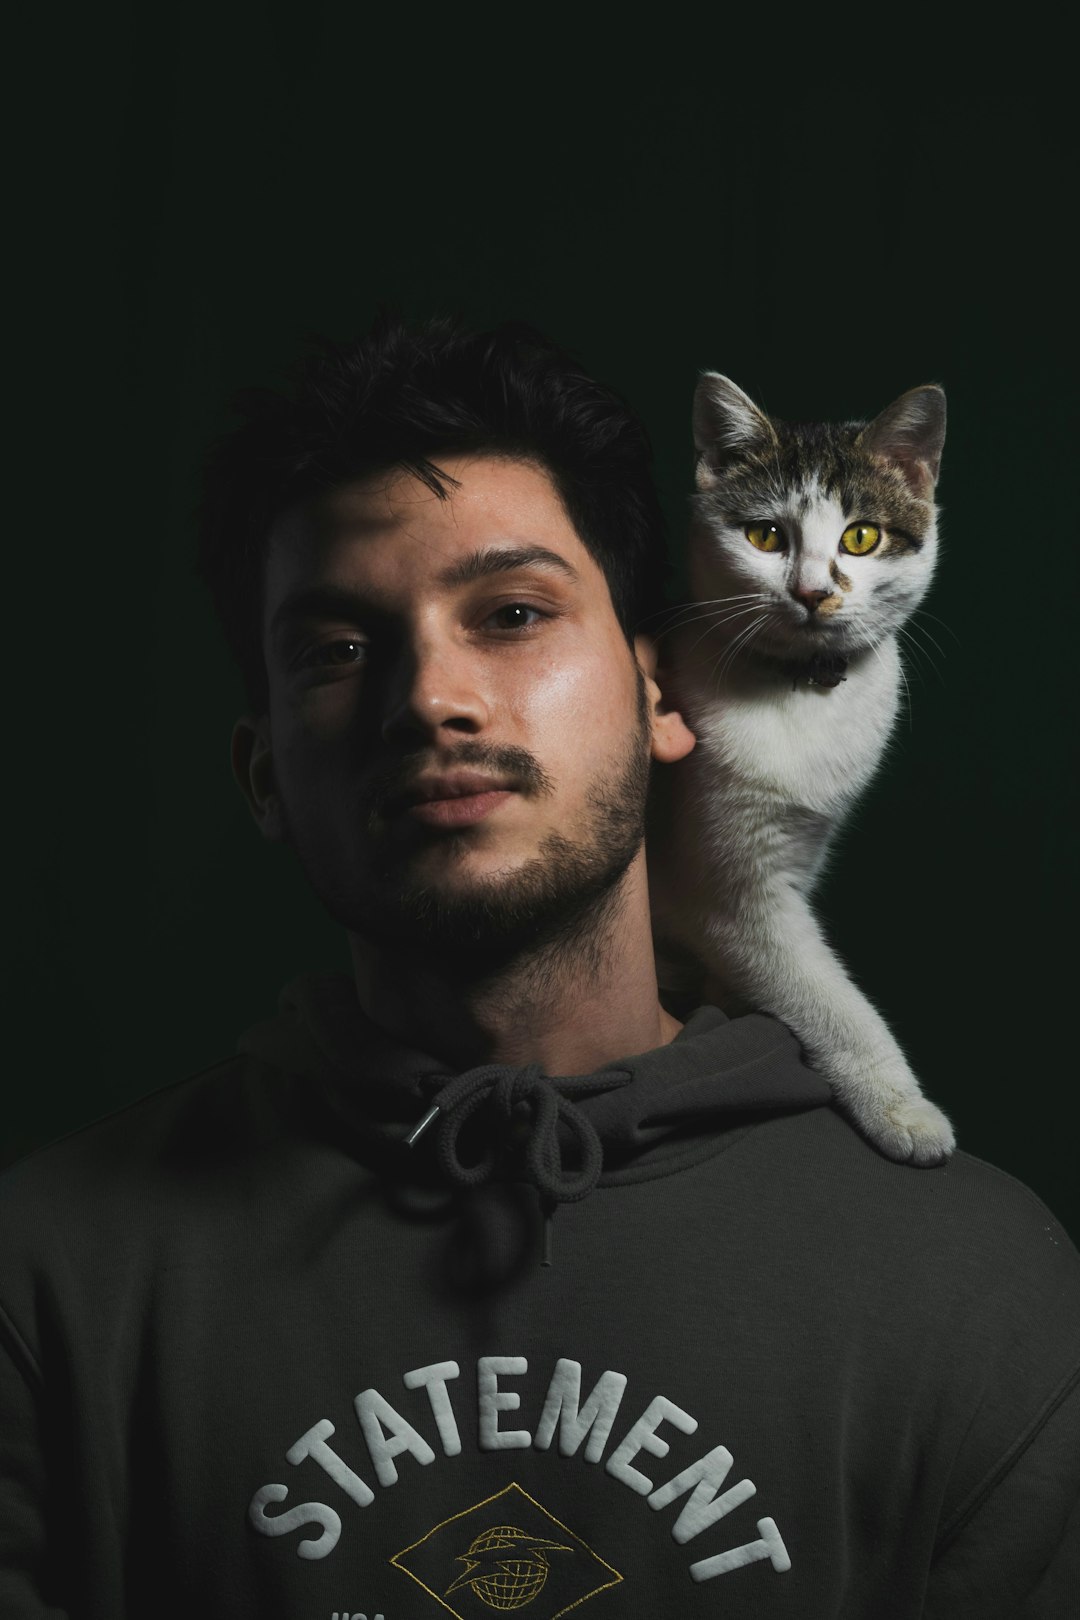 man in black crew neck shirt holding white and gray cat